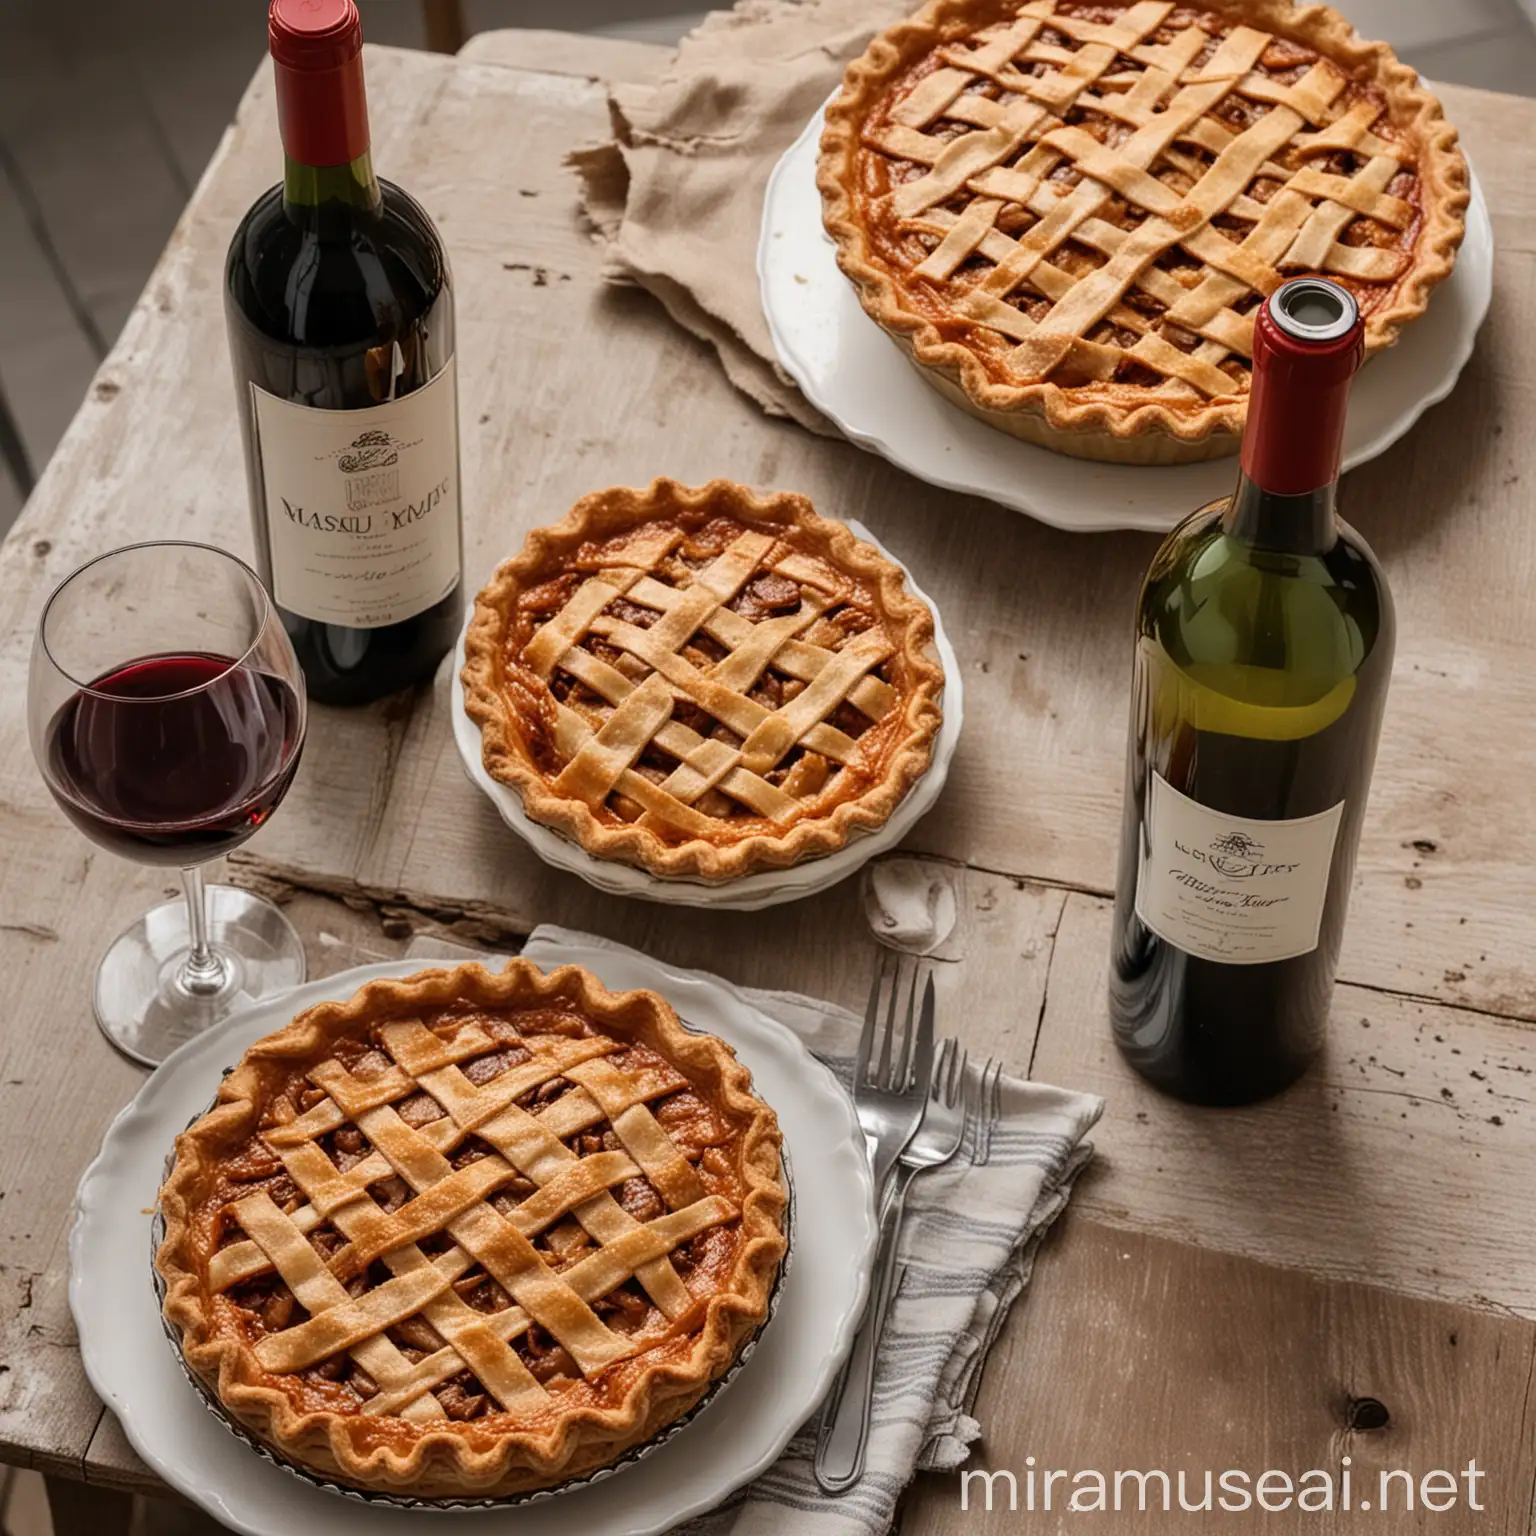 Homemade Pie with Wine Rustic Table Setting